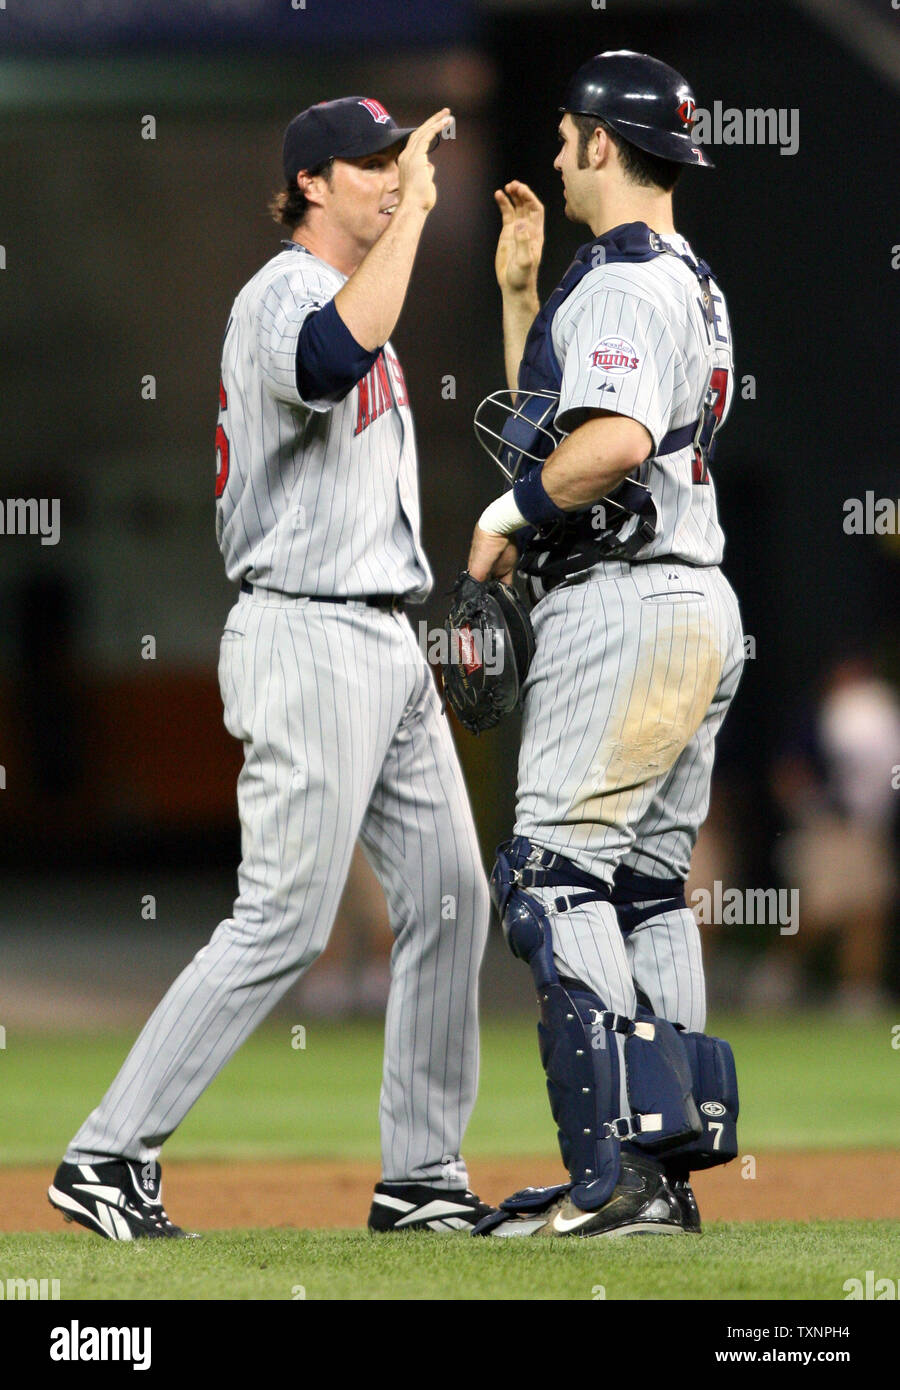 Joe Mauer puts on the tools of ignorance once last time. Greatest catcher  Twins history!